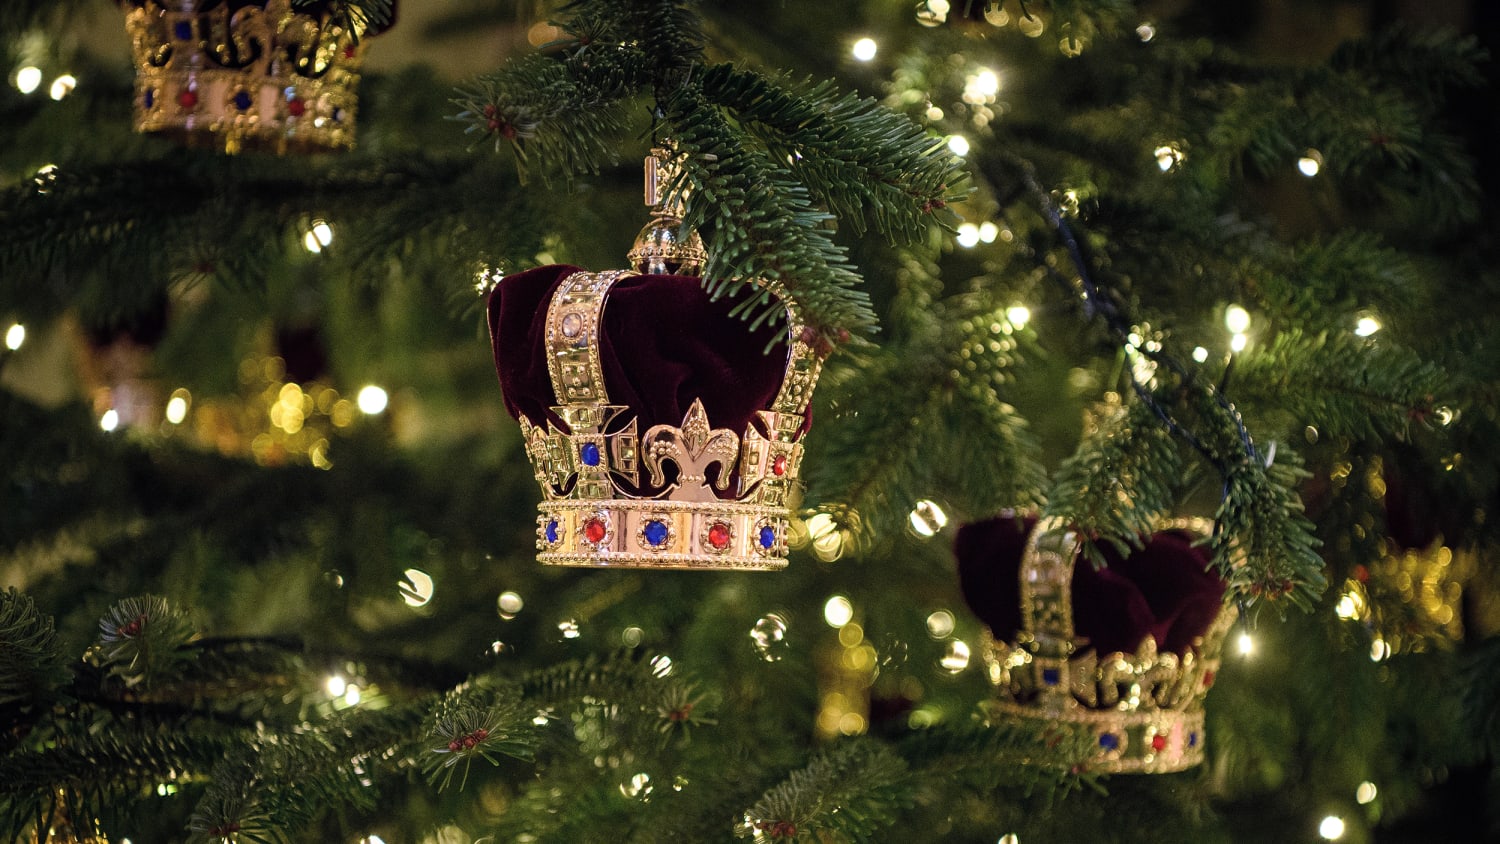 Buckingham Palace debuts its Christmas decorations - TODAY.com